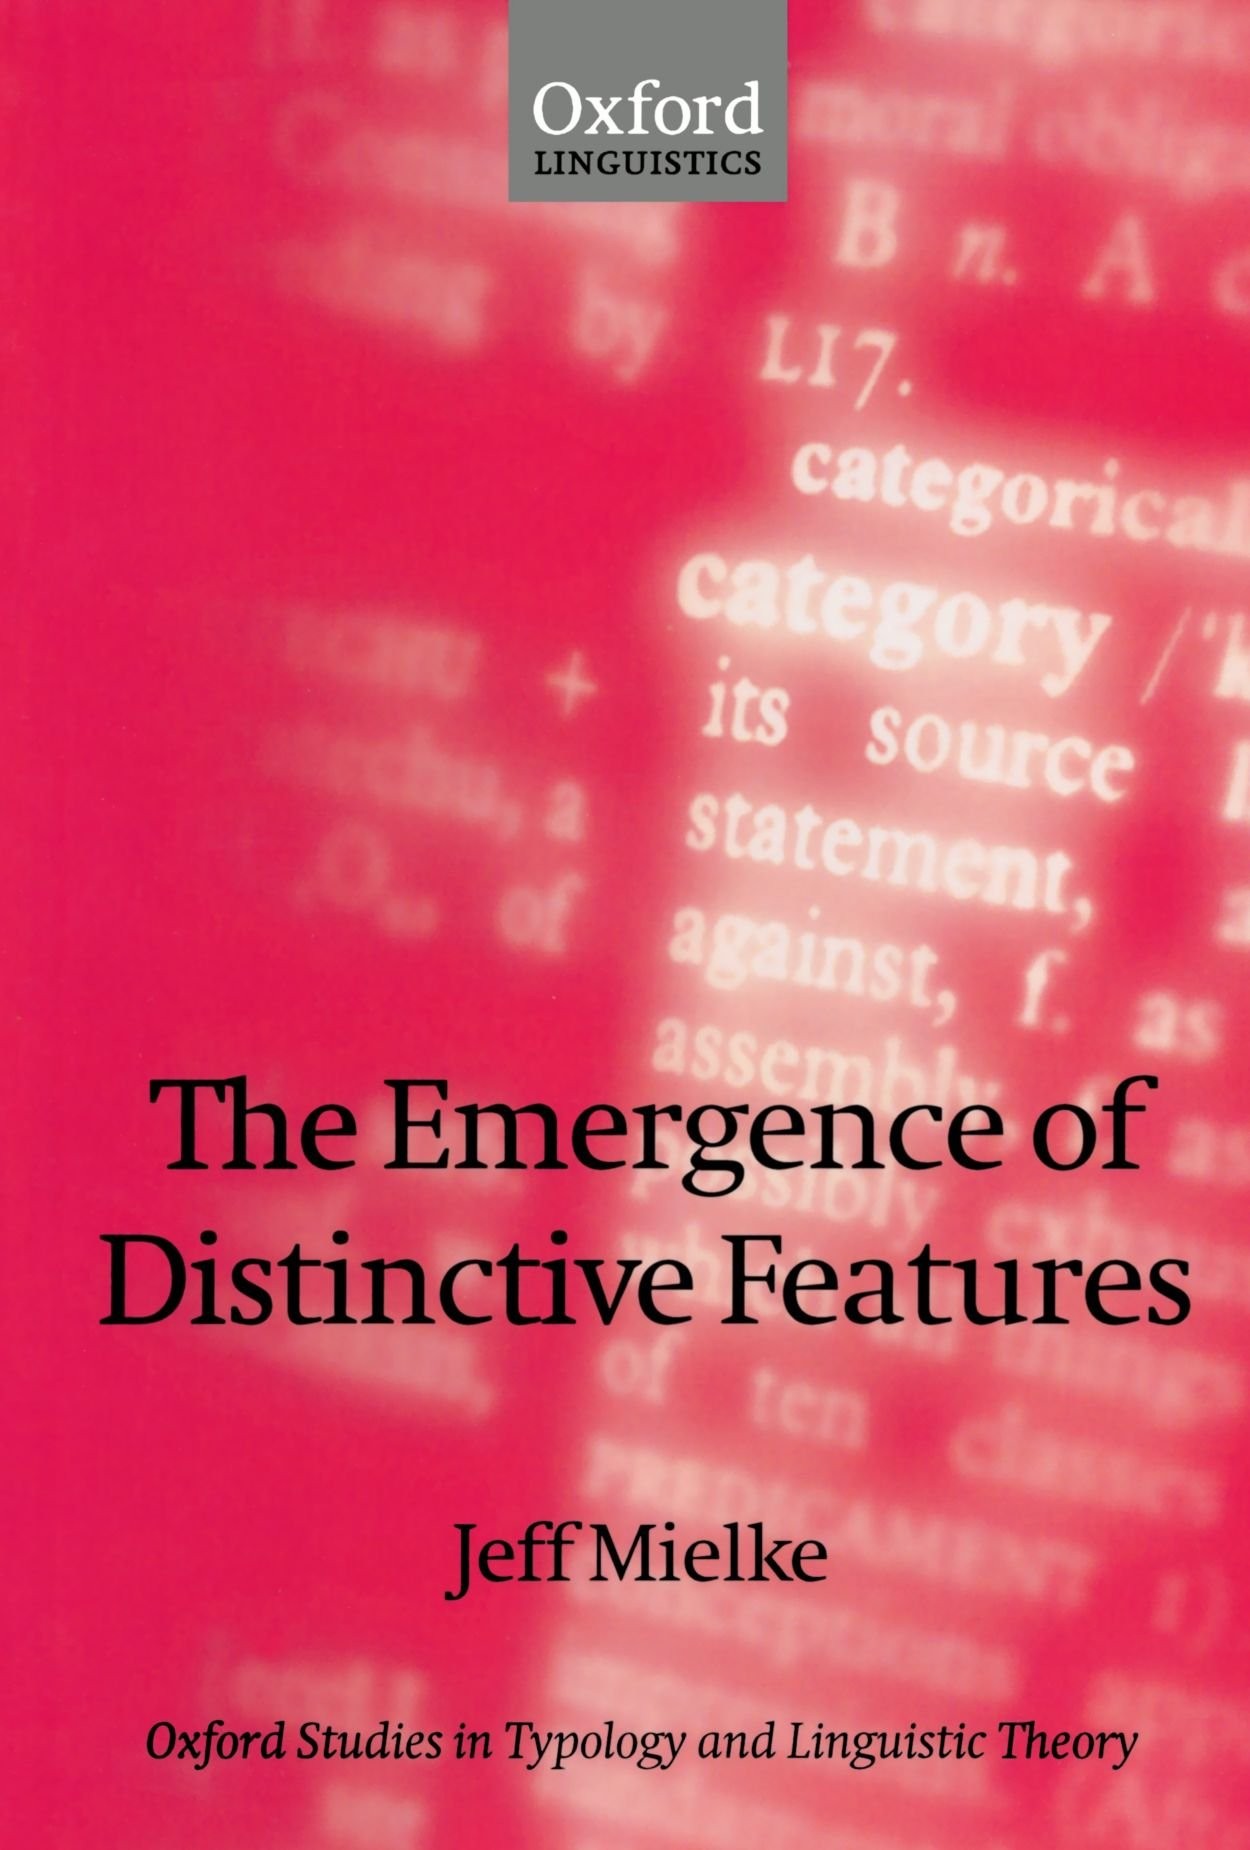 The Emergence of Distinctive Features